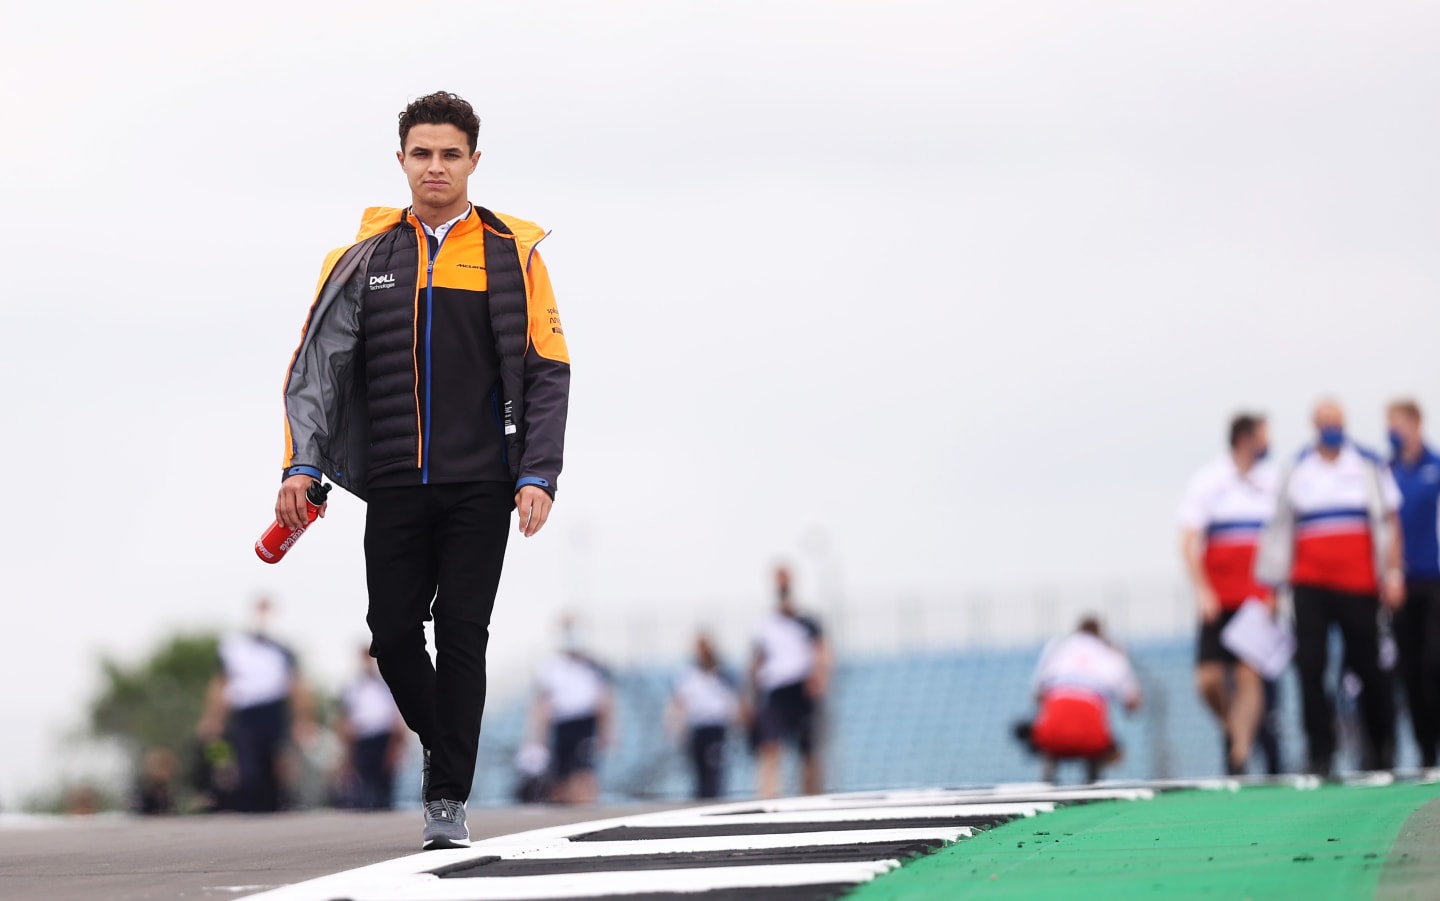 NORTHAMPTON, ENGLAND - JULY 15: Lando Norris of Great Britain and McLaren F1 walks the track during